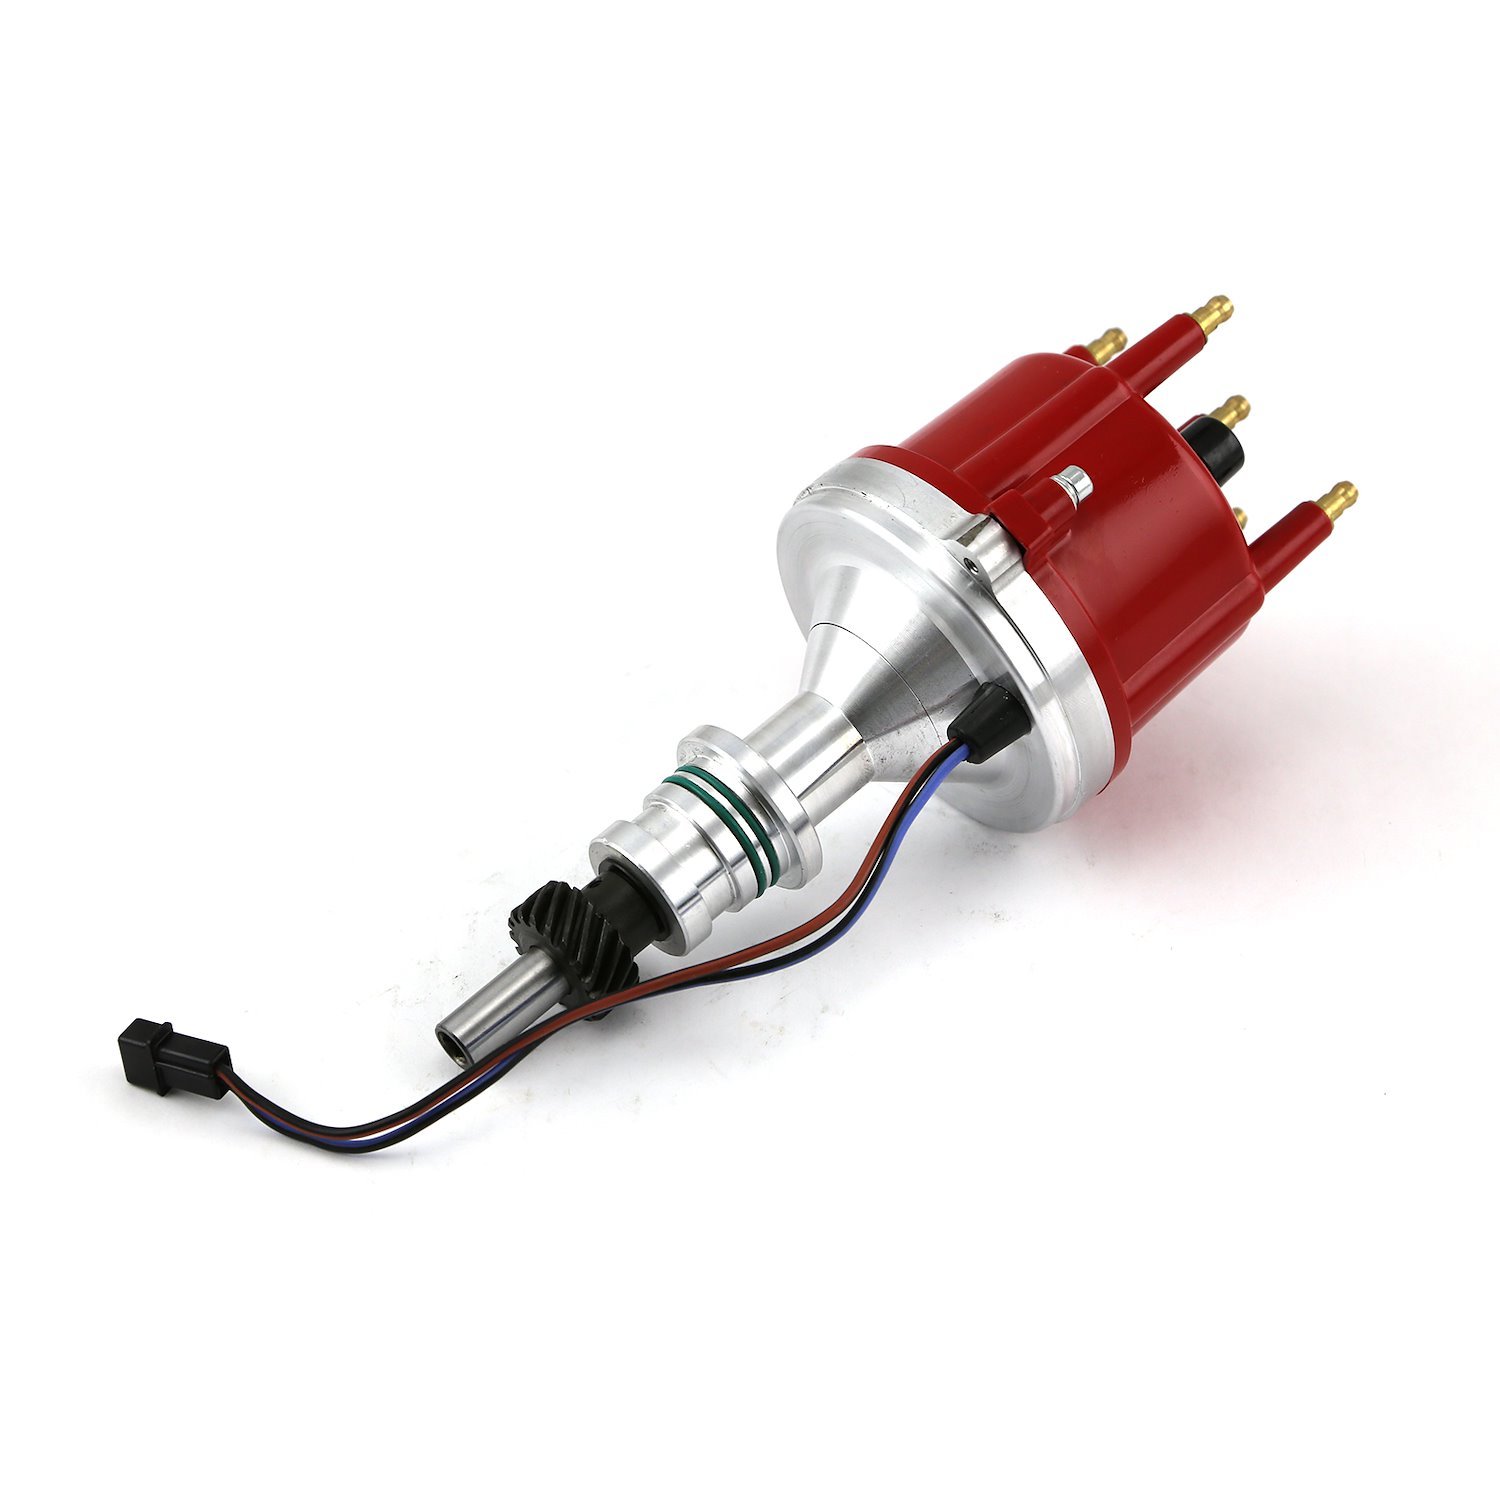 PCE376.1148 Pro-Billet 8000-Series Distributor for 1974-1984 Ford 2.3L 4-Cylinder Engines [Red]